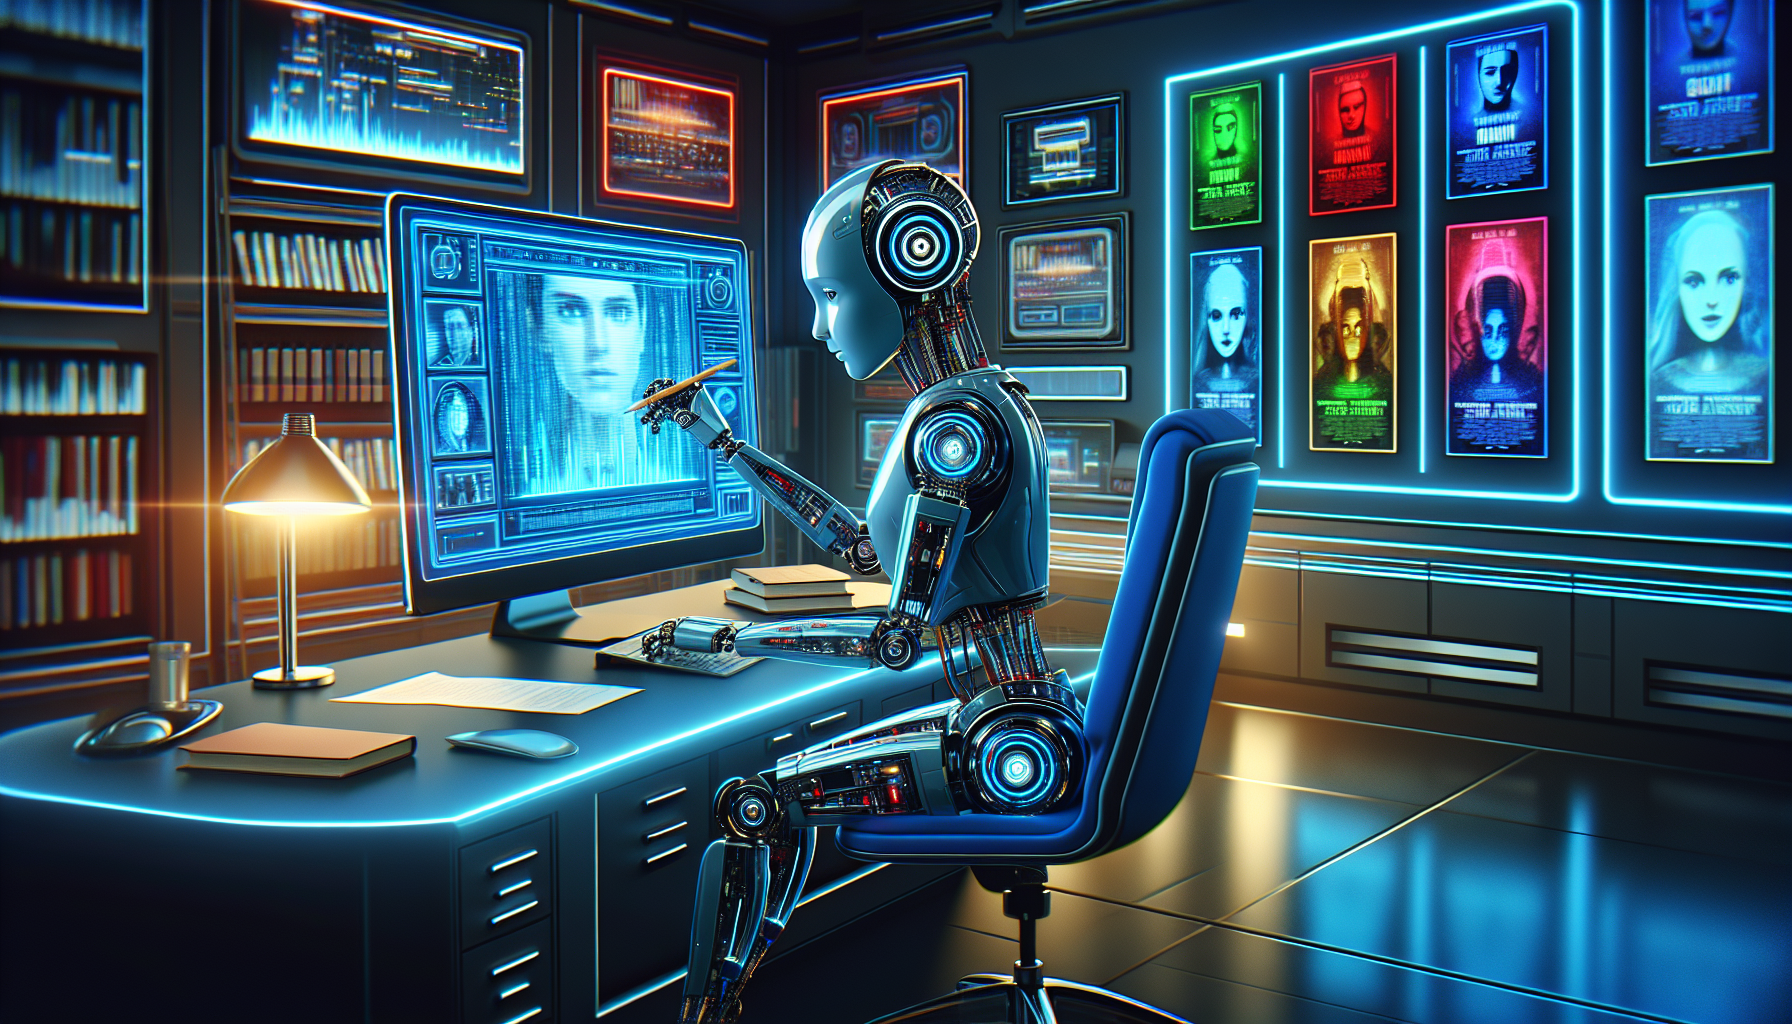 DALL-E, create an image of a futuristic AI robot editing a film screenplay on a holographic computer screen in a dimly lit, high-tech office, with posters of famous short films on the walls.